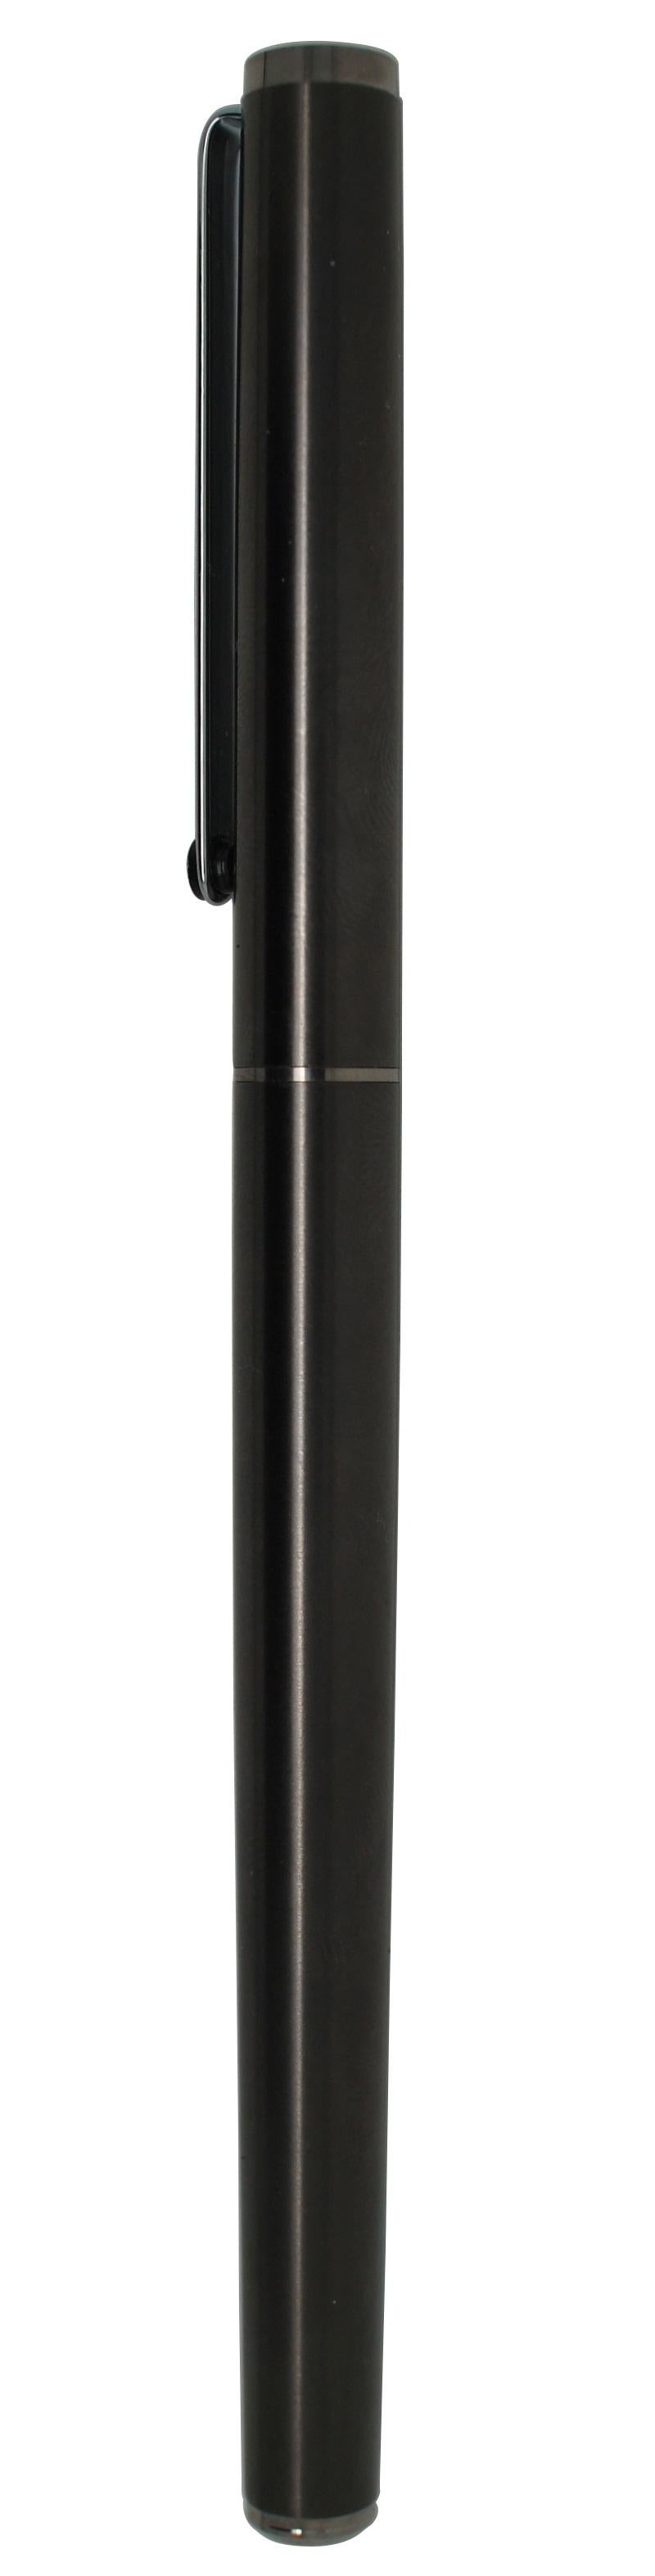 Vintage Montblanc Noblesse capped cartridge filled fountain pen. One 10 count package of Black ink cartridges included.
 